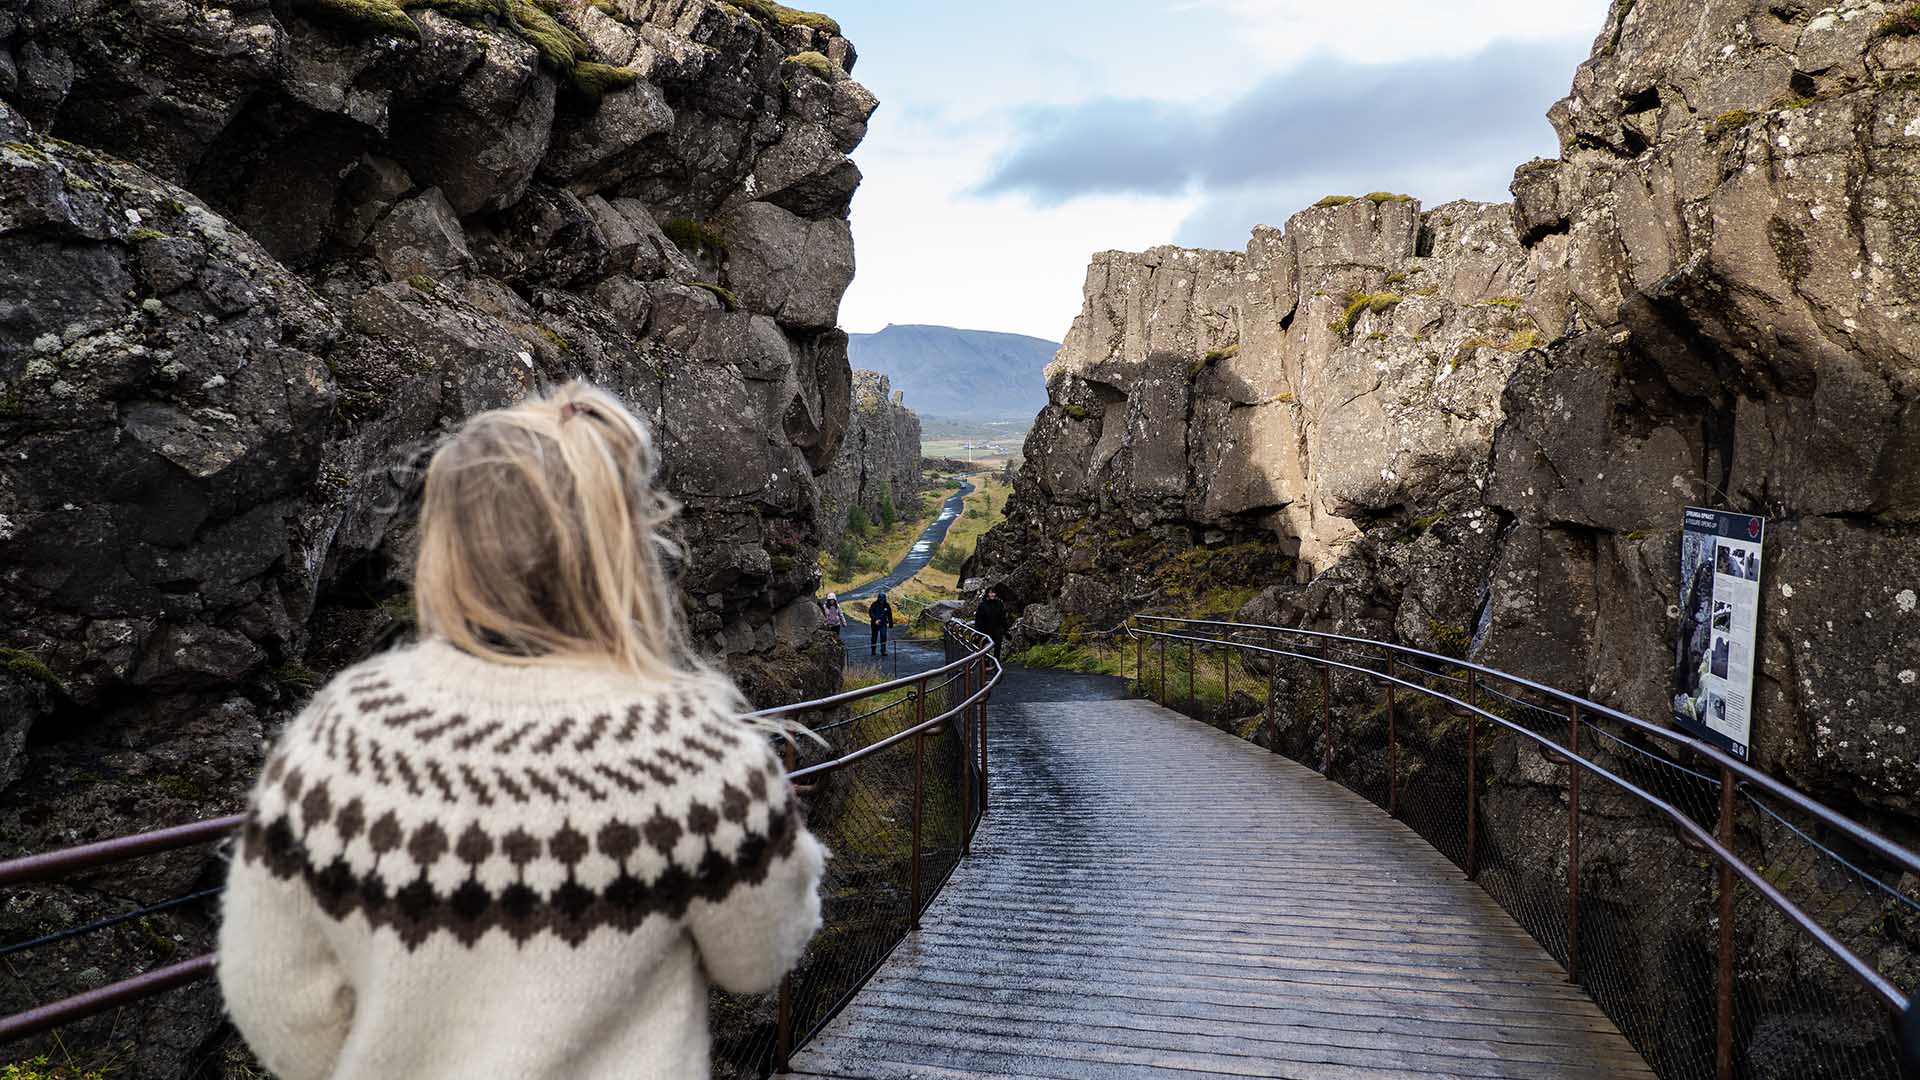 Thingvellir National Park with tectonic plates is a part of the Golden Circle